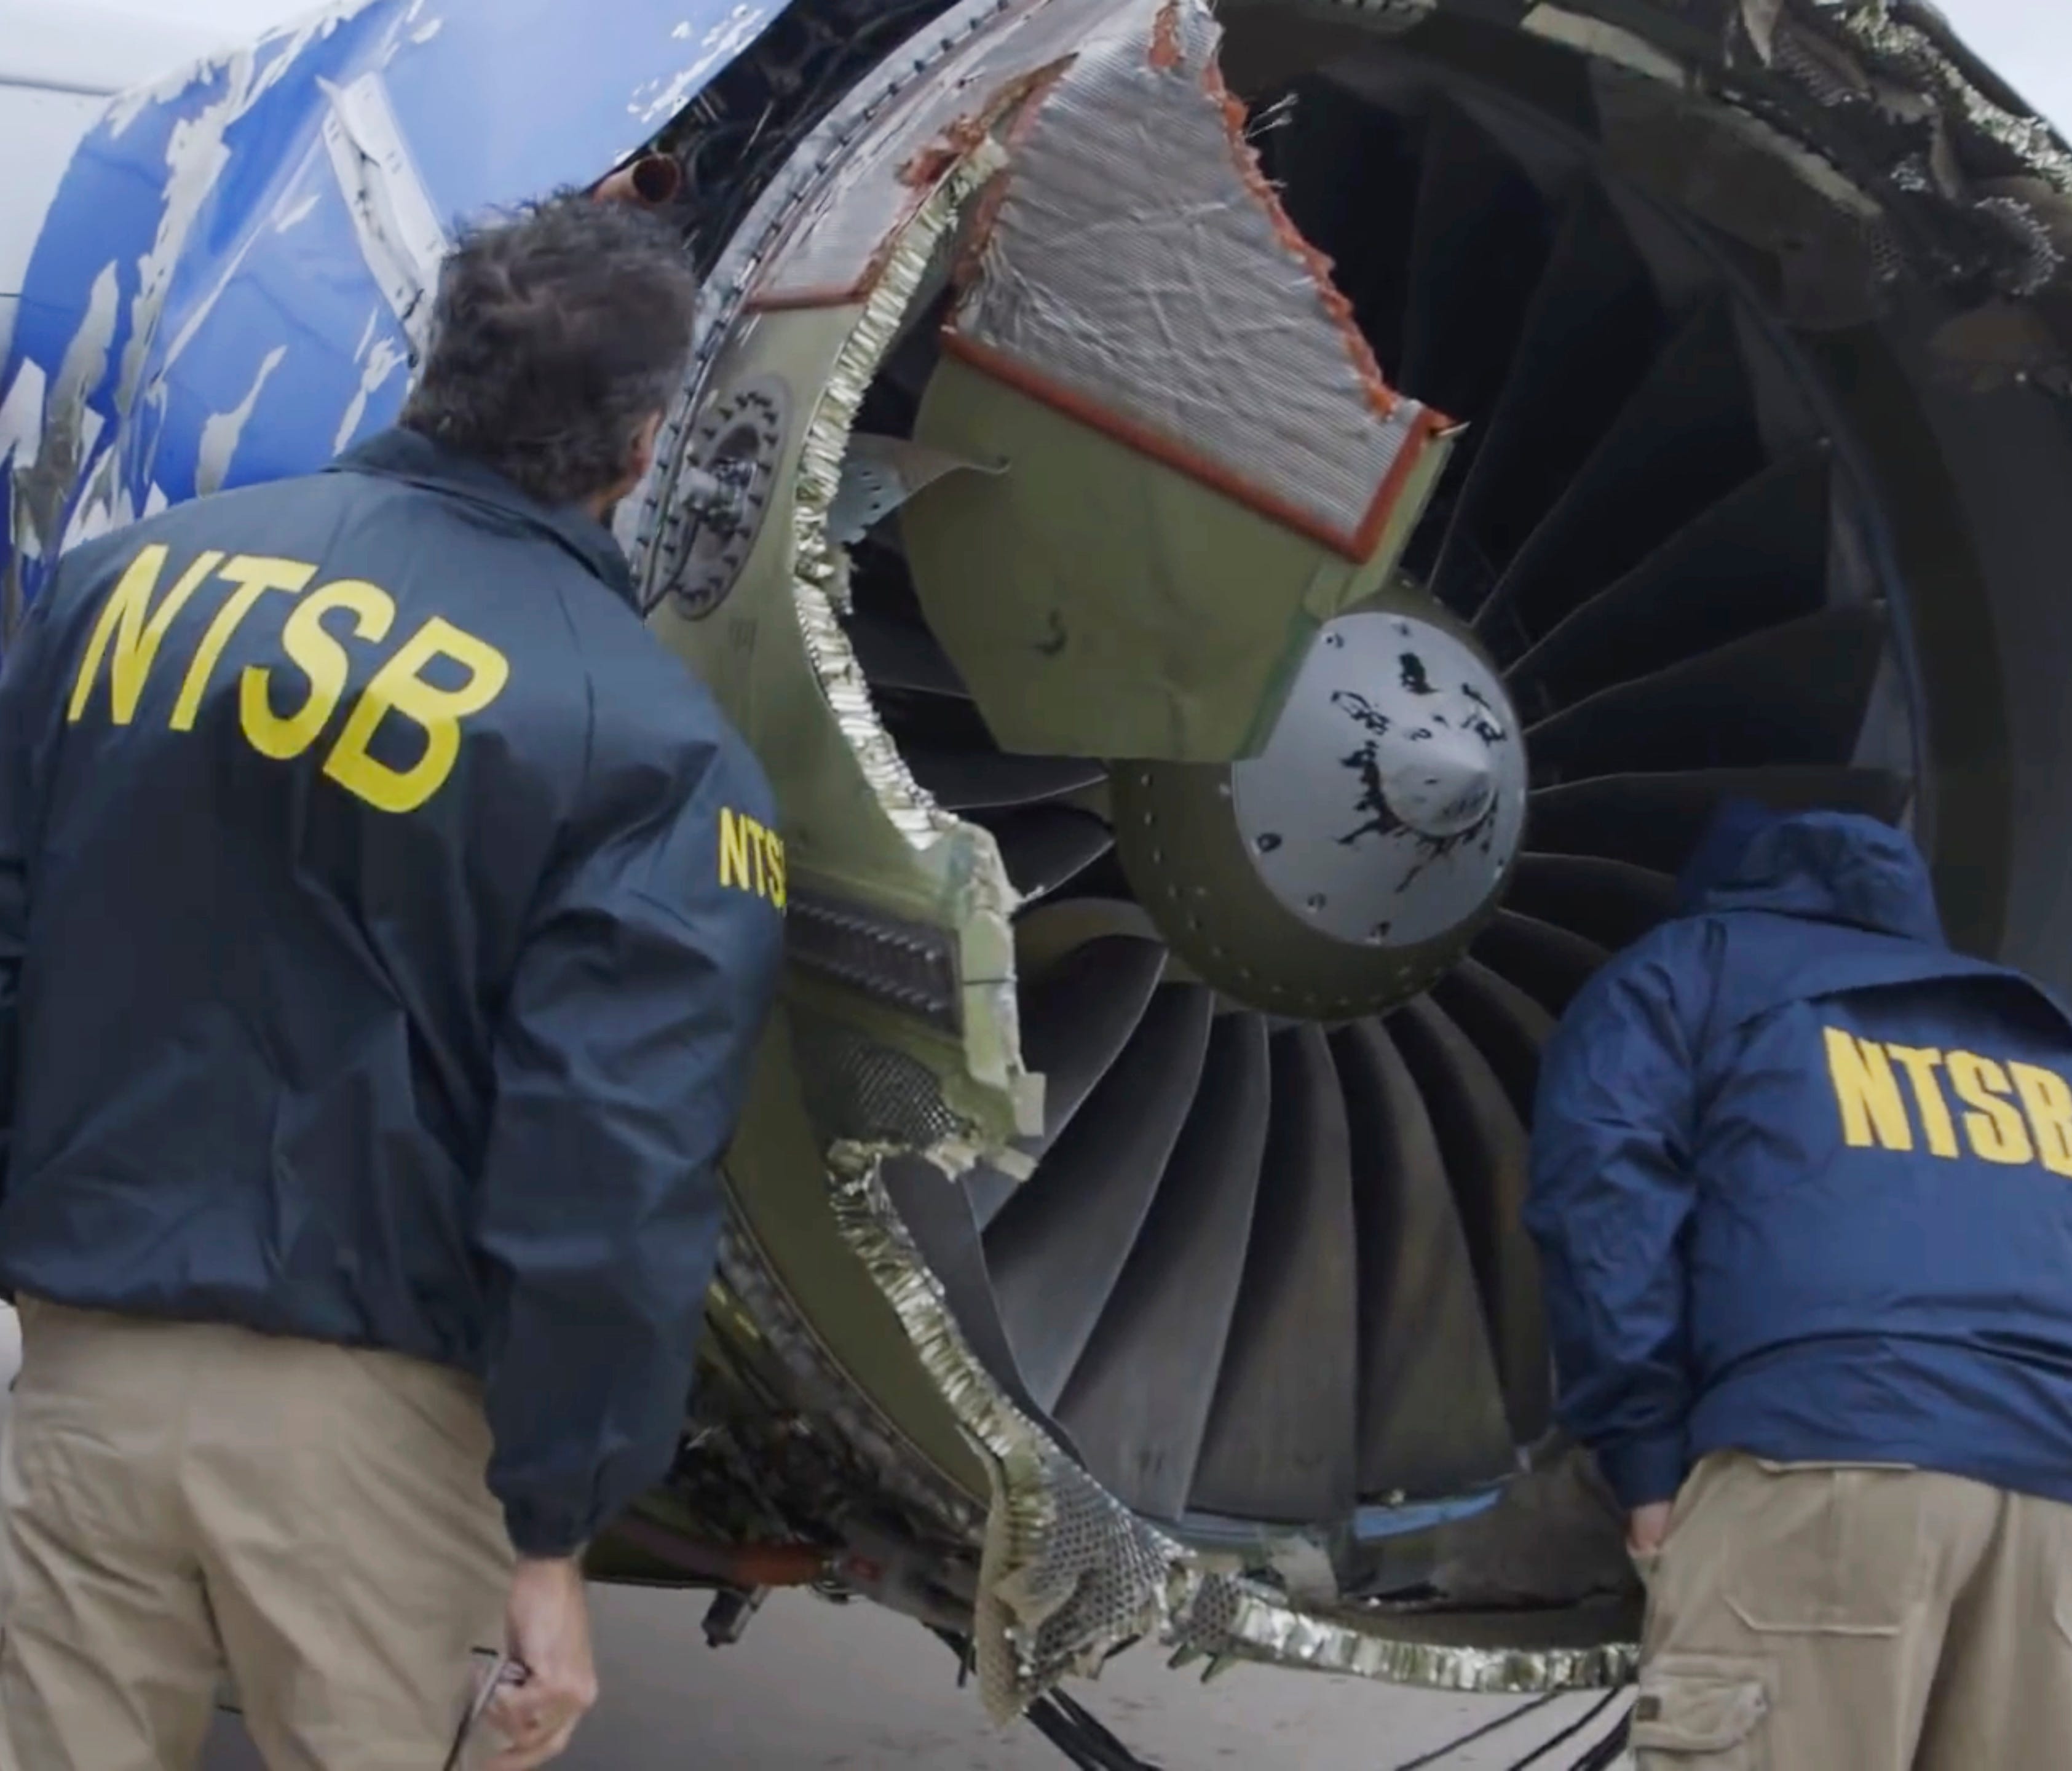 National Transportation Safety Board investigators examine damage to the engine of the Southwest Airlines plane that made an emergency landing at Philadelphia International Airport in Philadelphia on April 17, 2018.